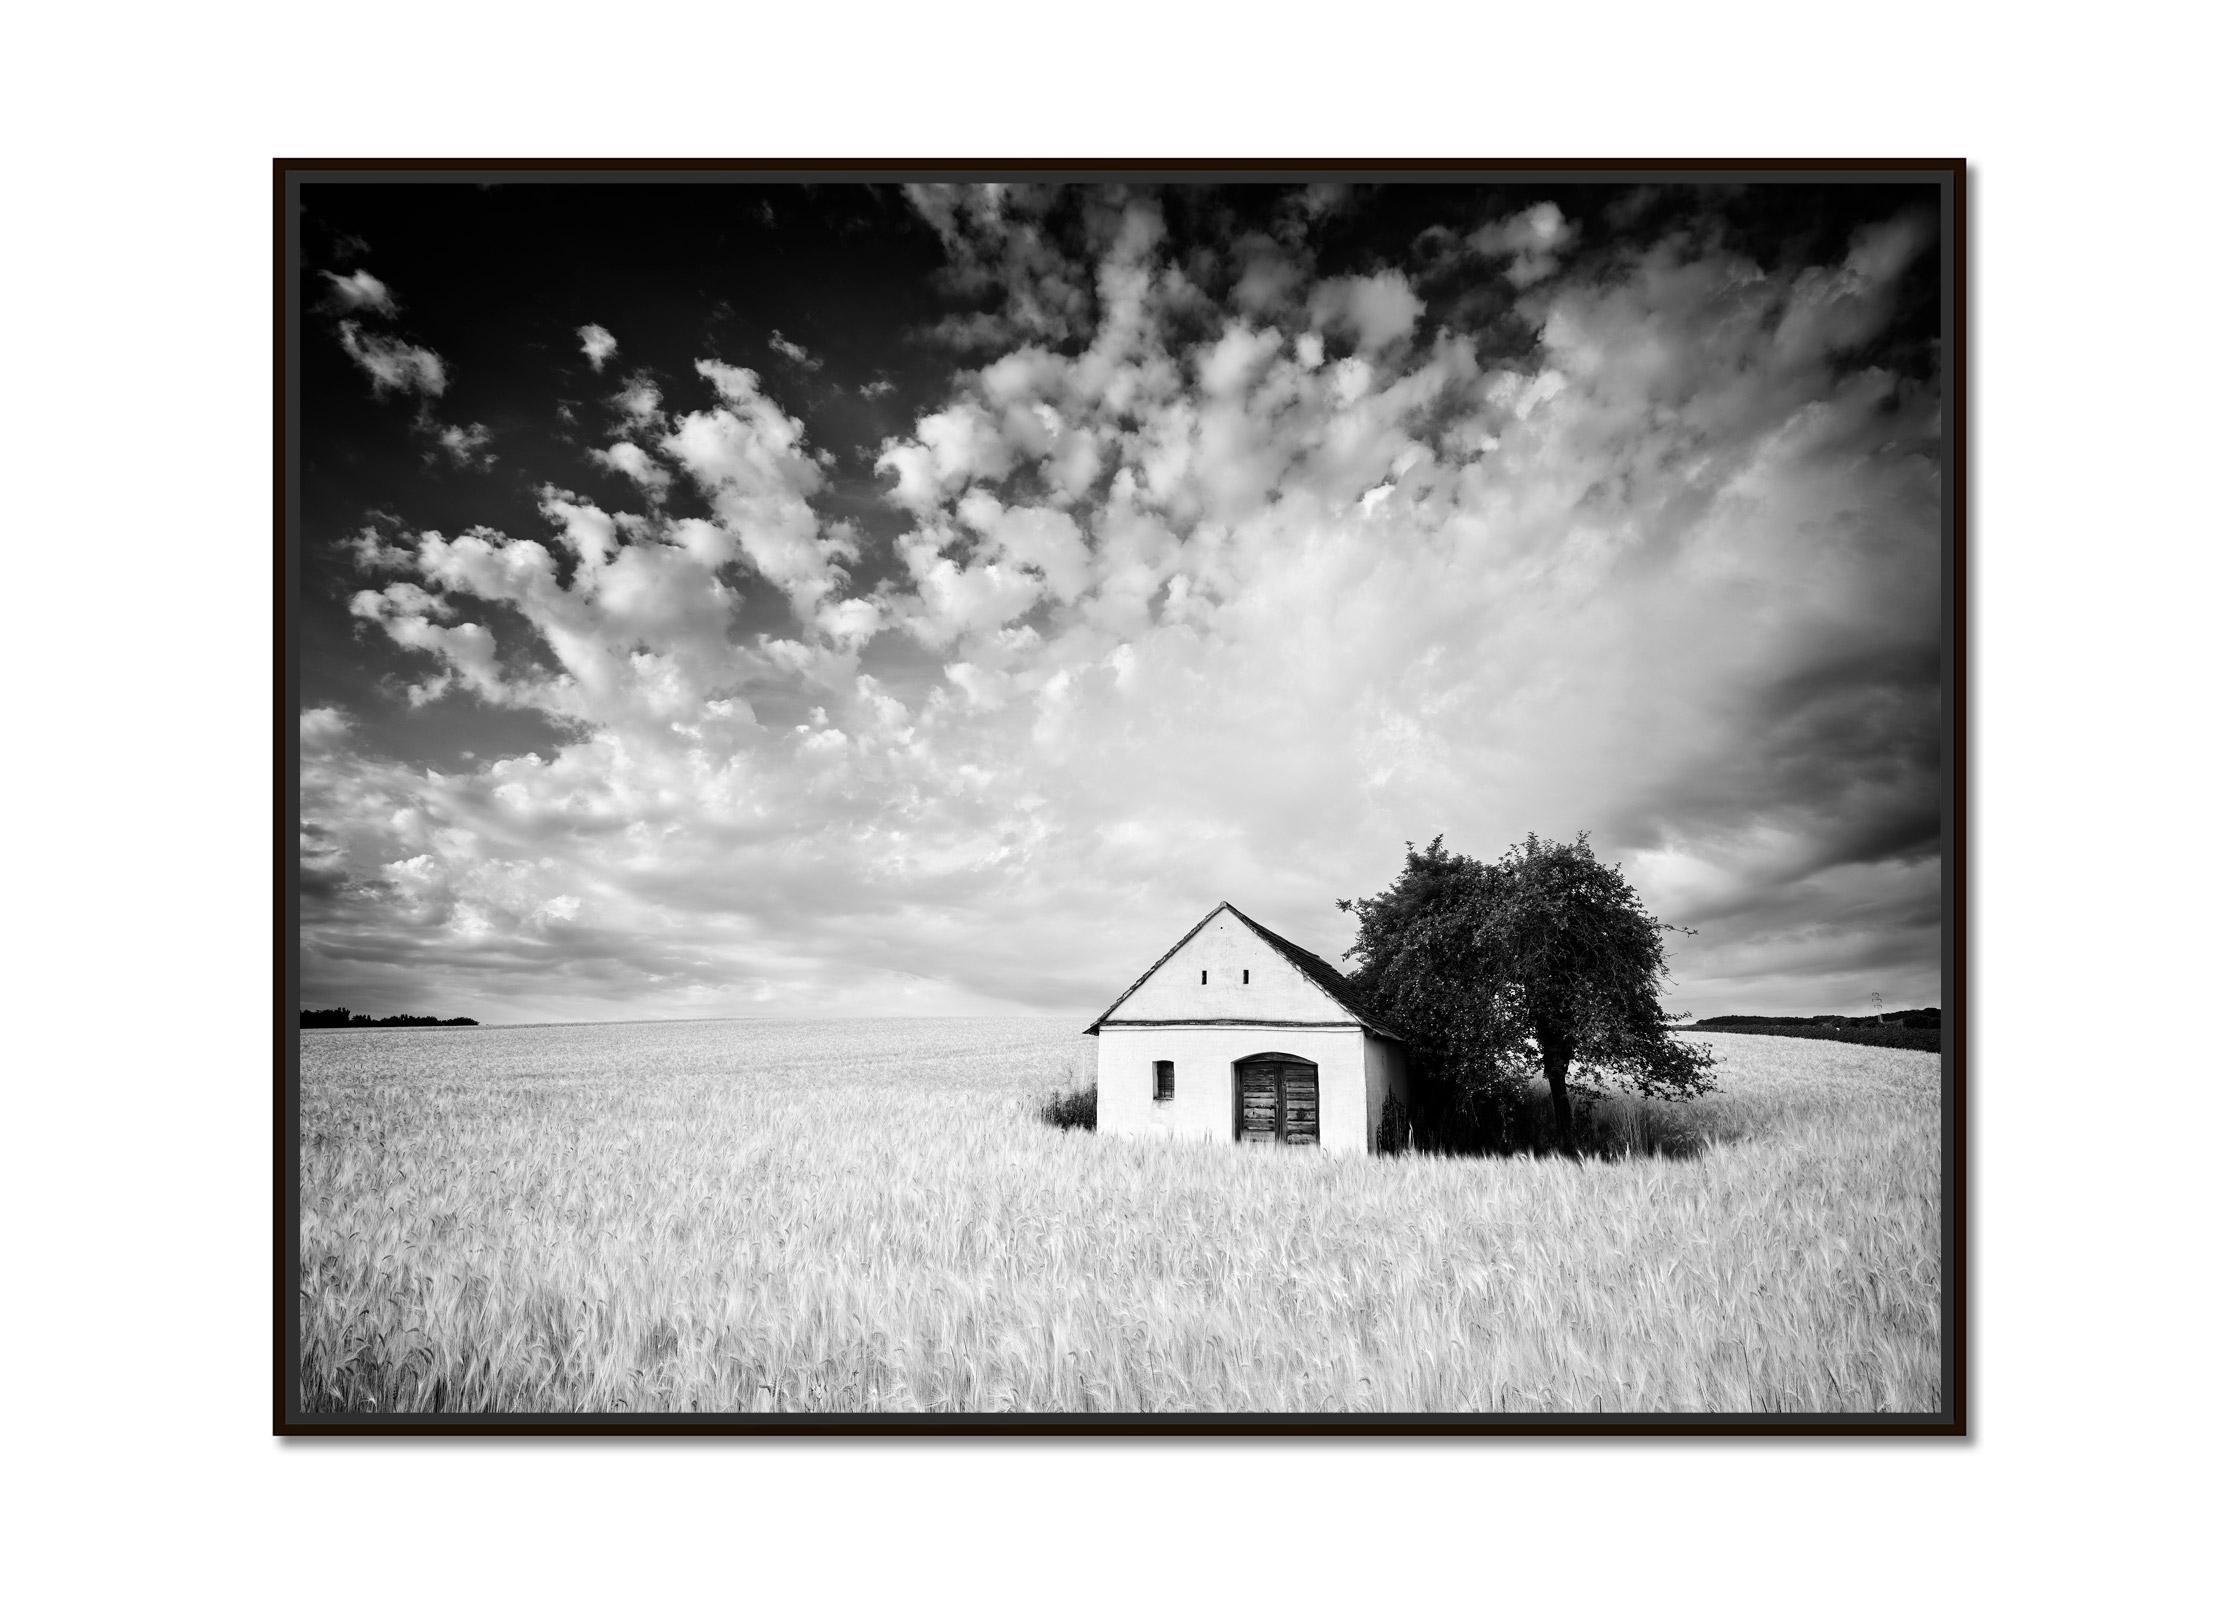 Farm Hut, Cornfield, giant Clouds, black and white photography, landscape, art - Photograph by Gerald Berghammer